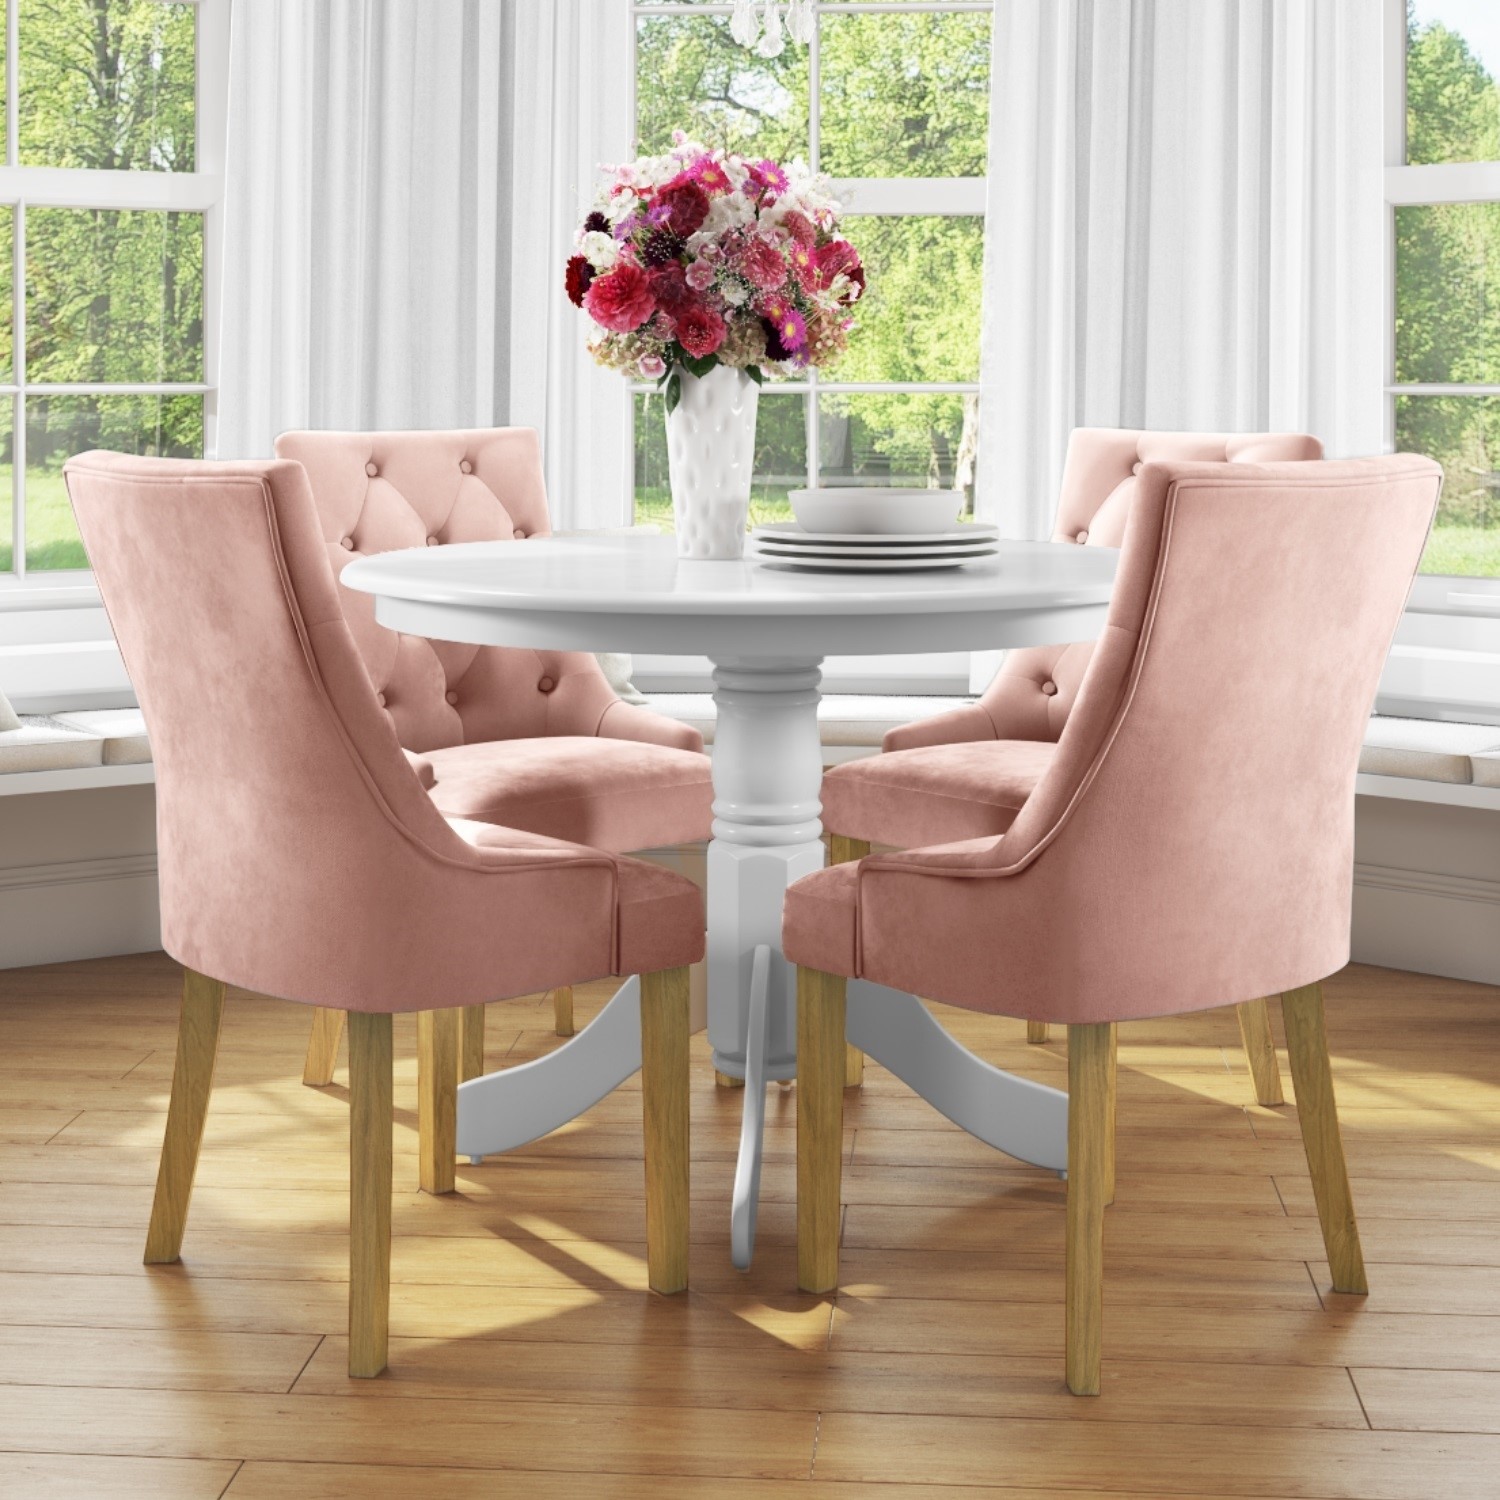 Small Round Dining Table In White With 4 Velvet Chairs In Pink